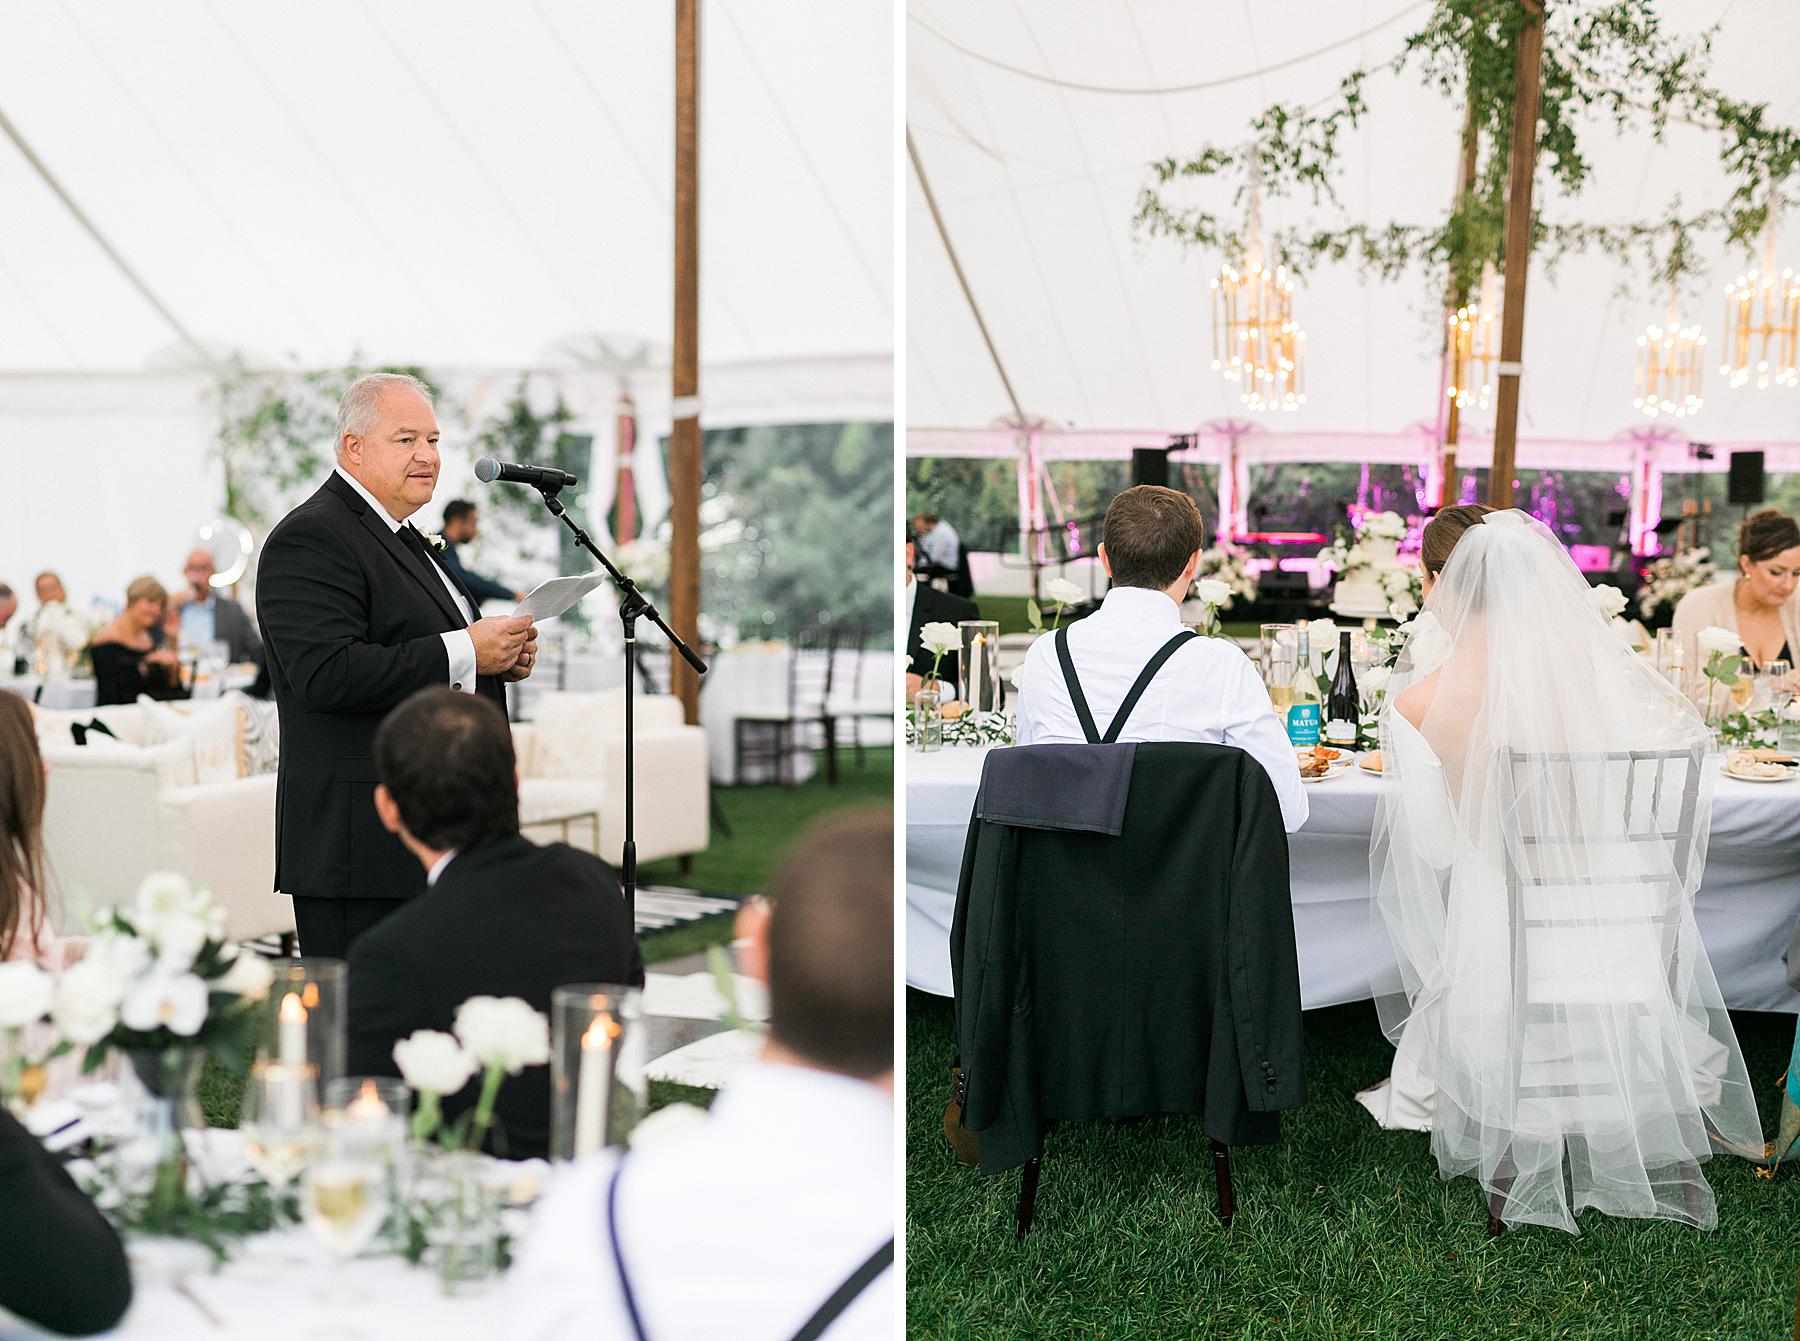 speech toast to newlyweds in a tented wedding reception, at horseshoe bay beach club in door county